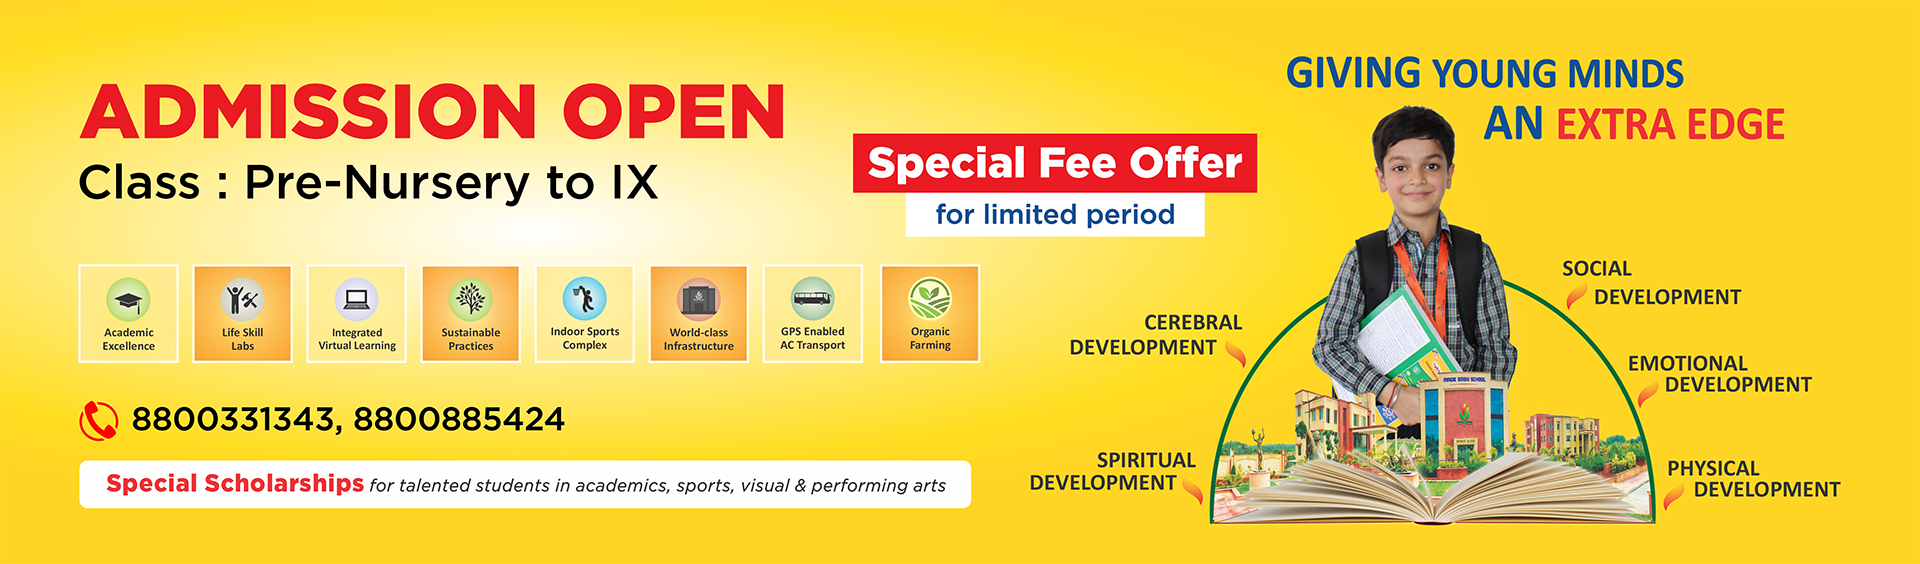 ADMISSION OPEN, Class Pre-Nursery to IX, Special Fee Offer for Limited Period